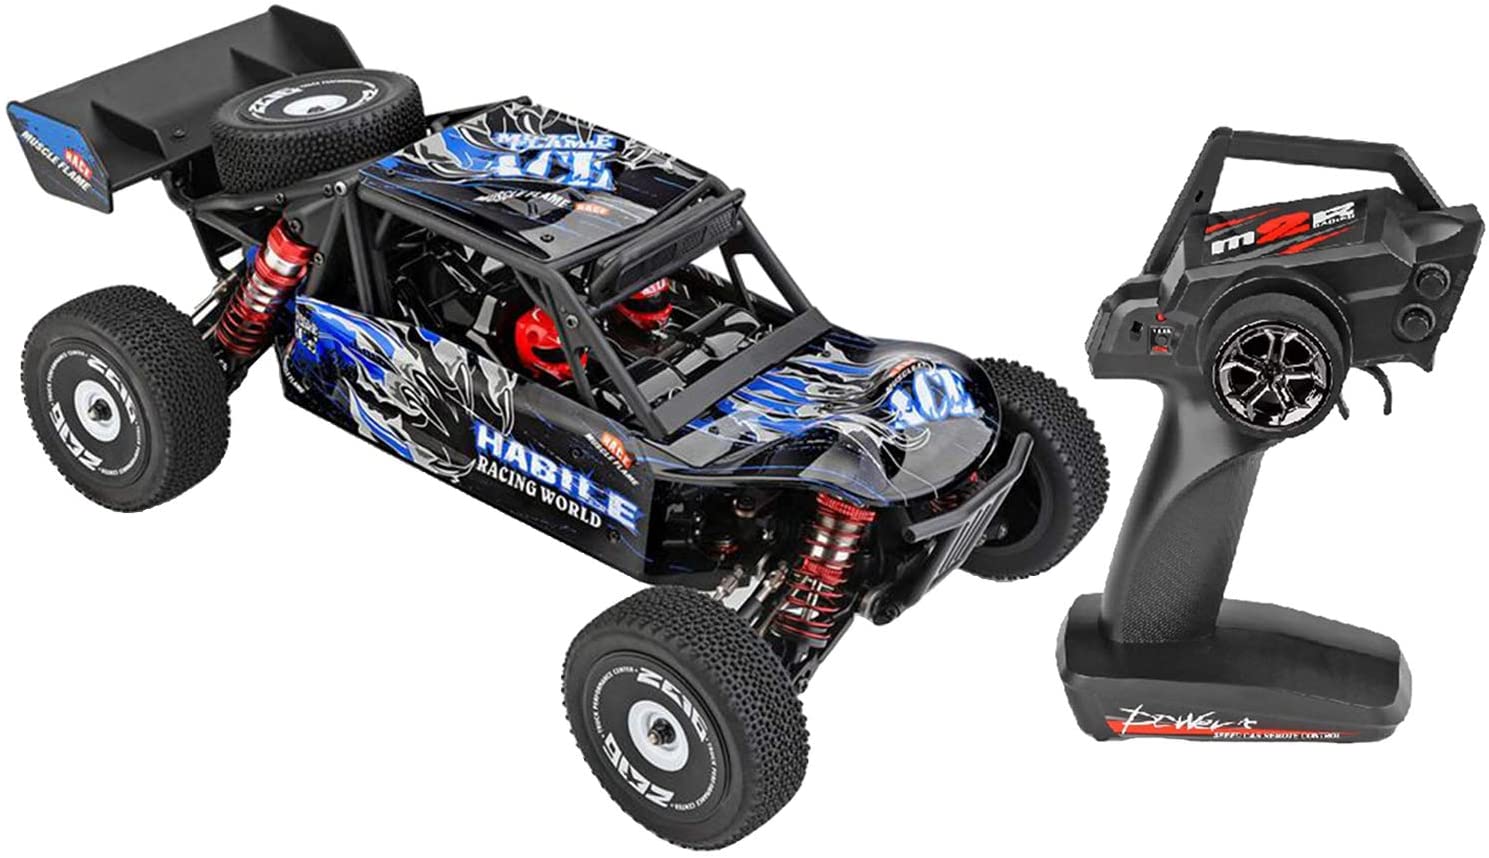 Wltoys 124018 High Speed Racing Car 60km/h 1/12 2.4GHz RC Car Off-Road Drift Car RTR 4WD with Aluminum Alloy Chassis Zinc Alloy Gear